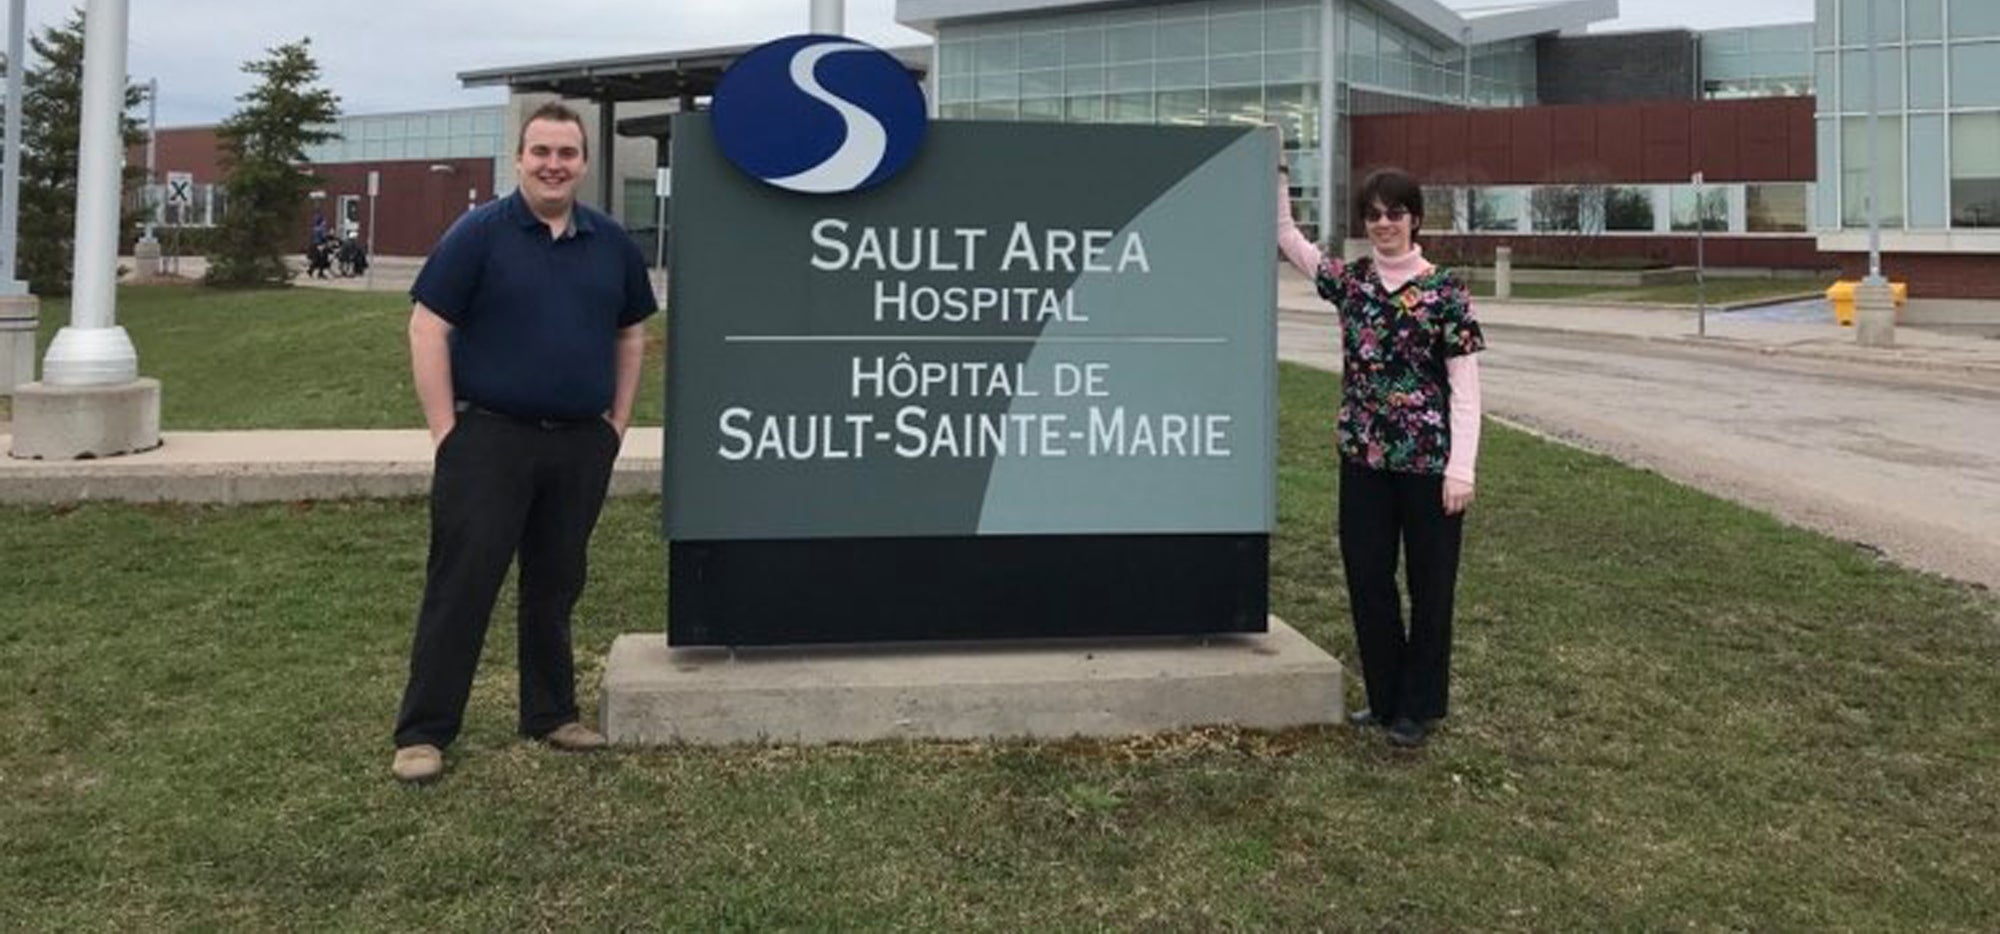 Nick and Krista standing next to a sign that says Sault Area Hospital